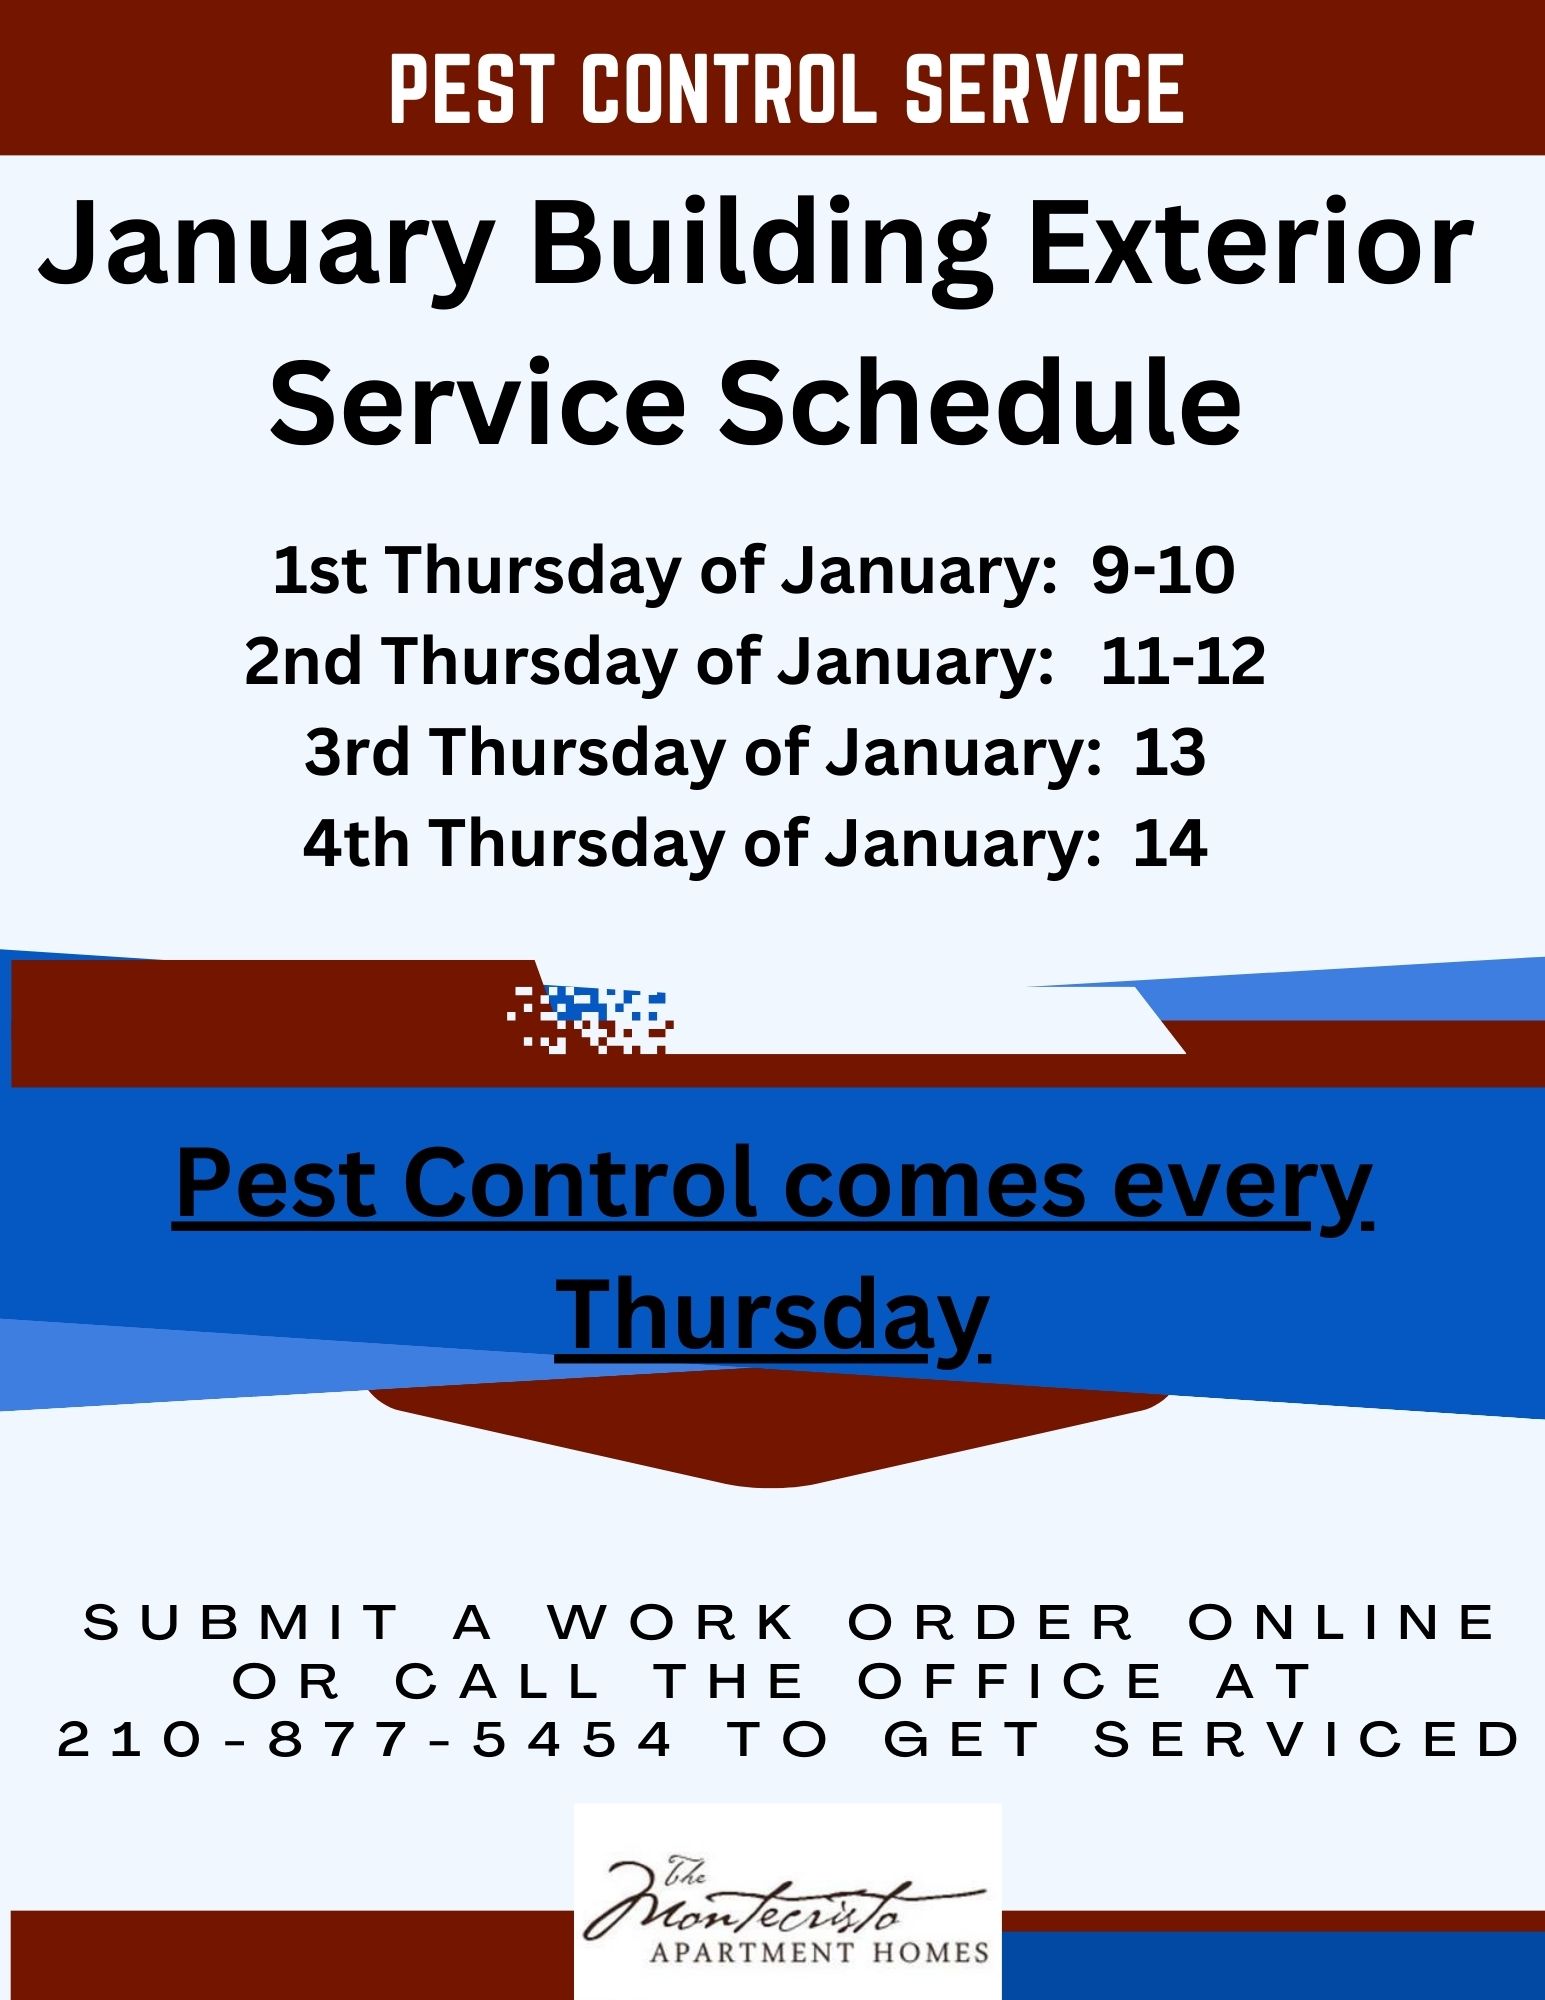 The Montecristo Apartments in Stone Oak, San Antonio have scheduled their building exterior pest control service for the month of January.